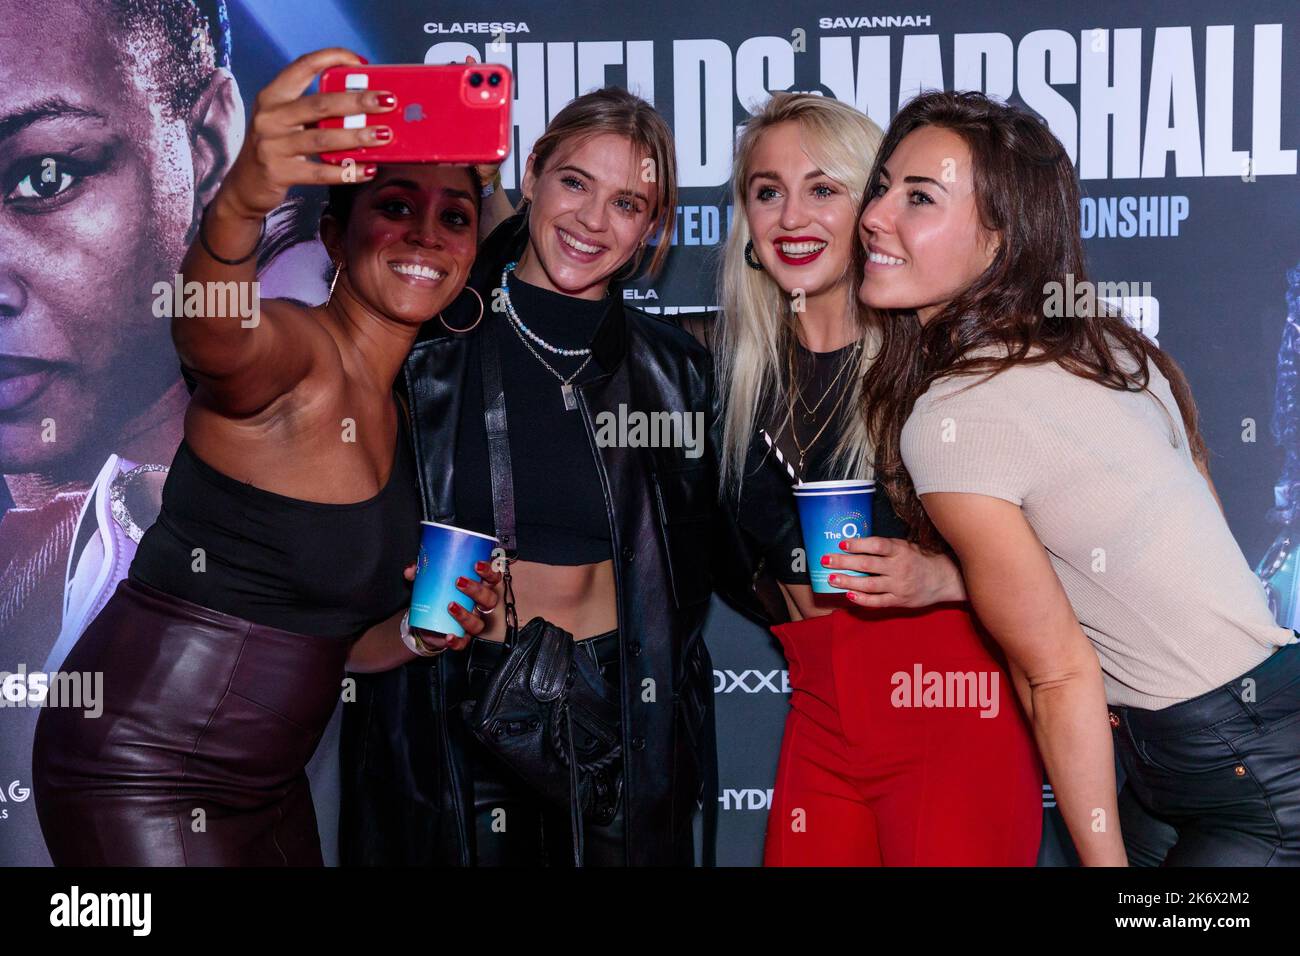 The O2, London, UK. 15th October 2022.  Ebony Rainford-Brent, Laura Crane, Lucy Cork and Aimee Fuller take a selfie on the red carpet at The O2 for the first-ever all-female boxing event in history.  Savannah Marshall and Claressa Shields will headline Boxxer’s Legacy show for the Undisputed World Middleweight Title. Photo by Amanda Rose/Alamy Live News Stock Photo